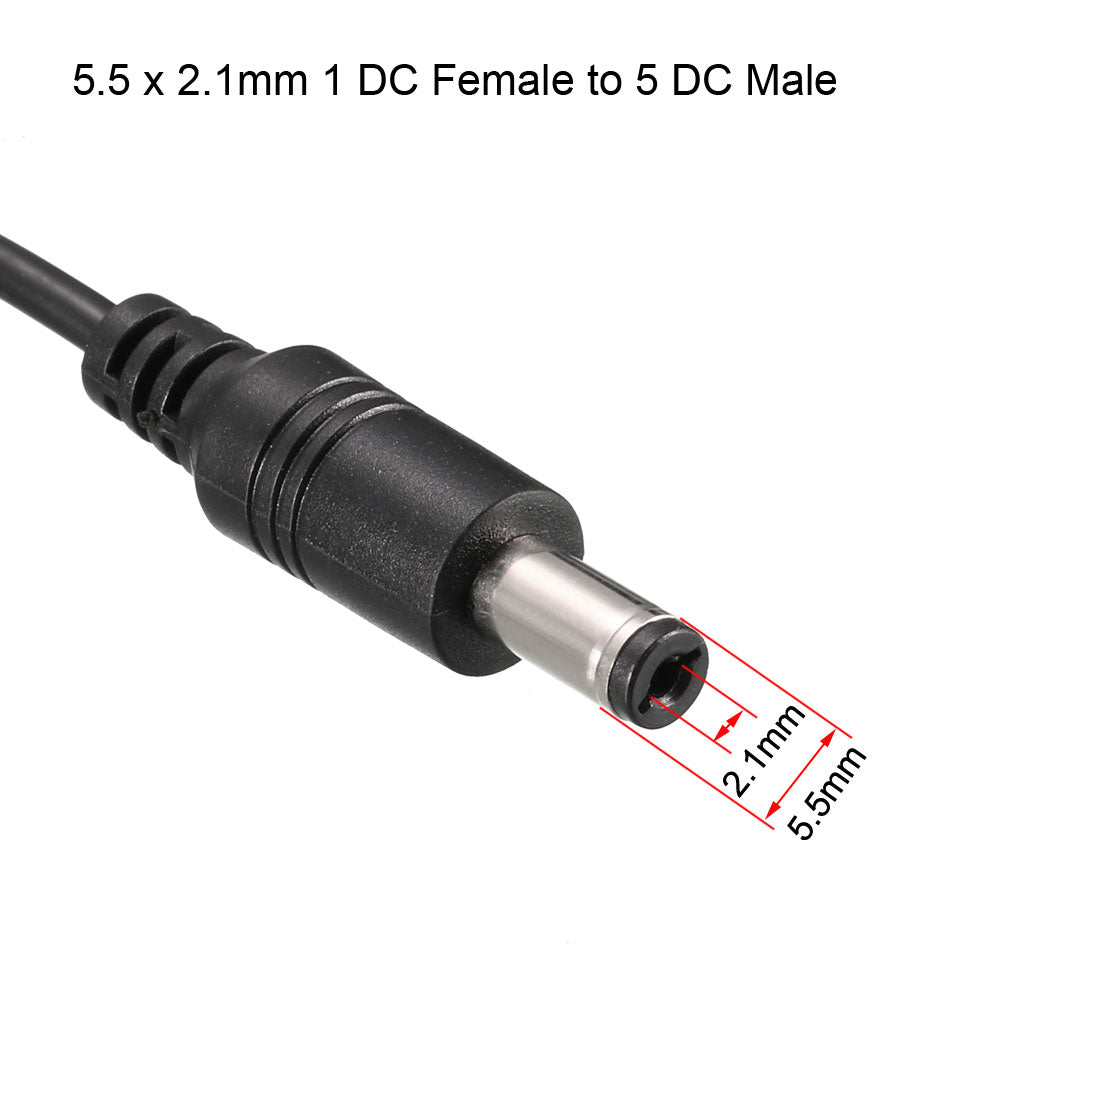 uxcell Uxcell 1 DC Female to 5 DC Male 5.5 x 2.1mm Power Extension Wire For CCTV Camera